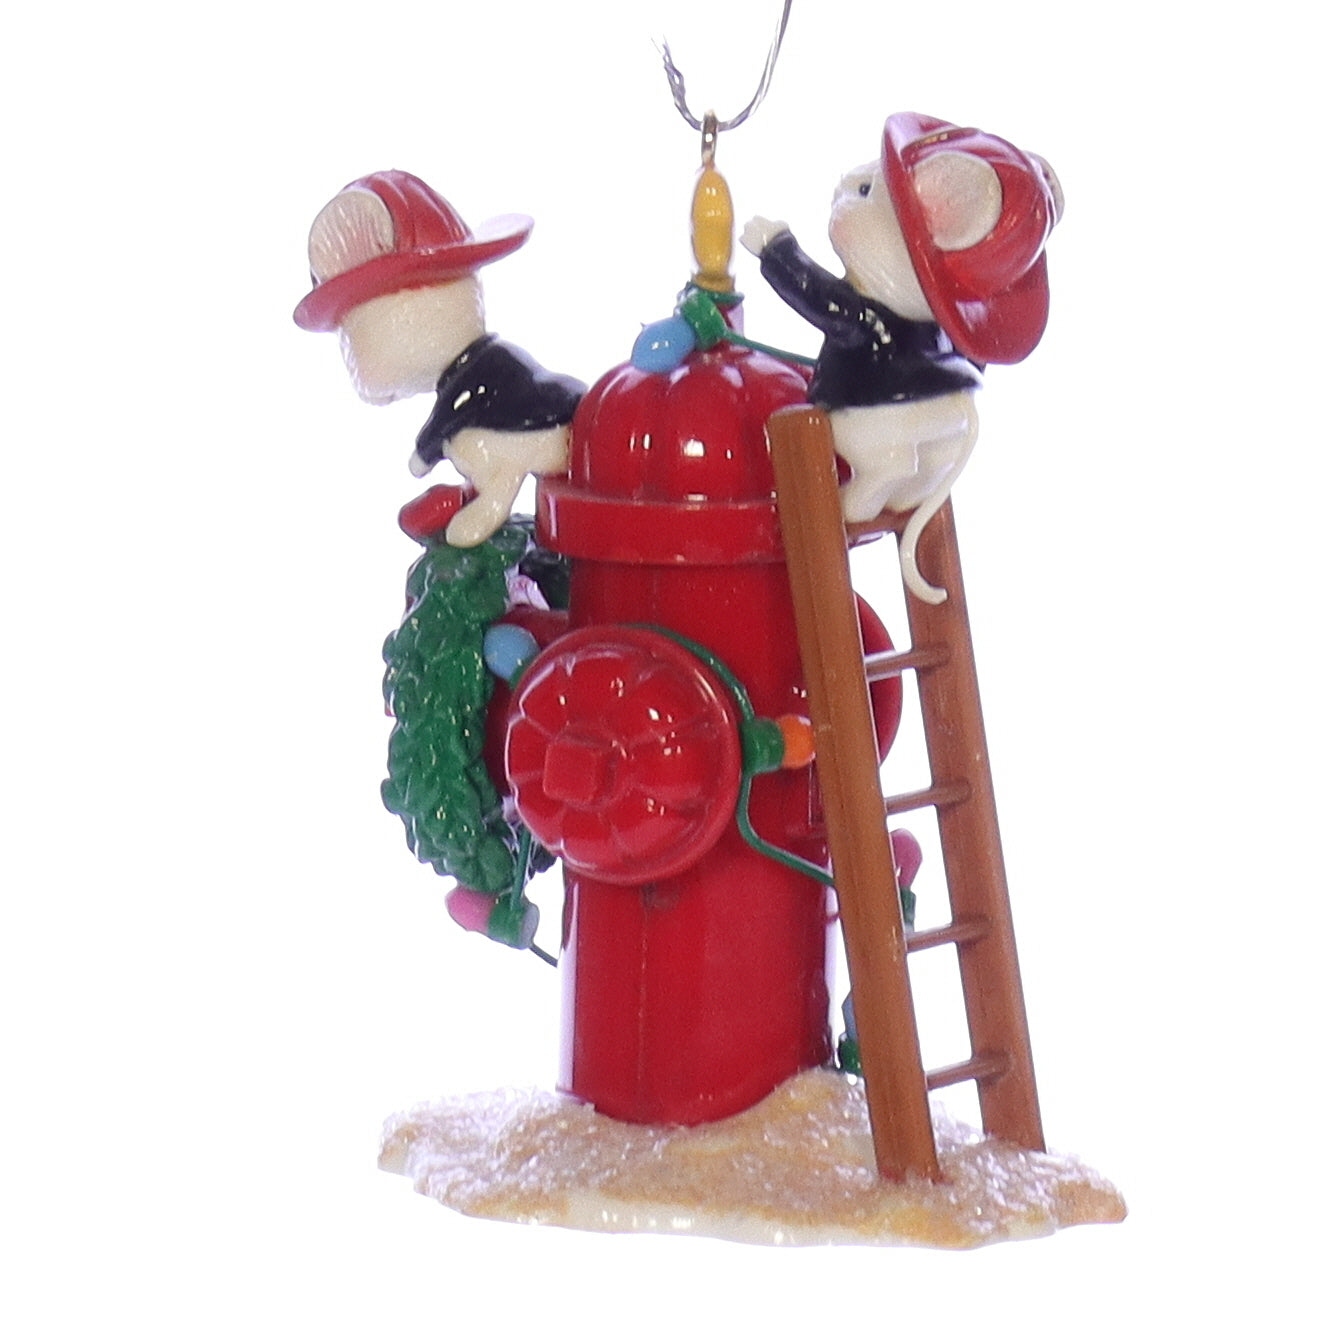 Enesco_Treasury_of_Christmas_Ornaments_573825_Warmest_Wishes_Northpole_Fire_Department_Mouse_Ornament_1990 Front Left View